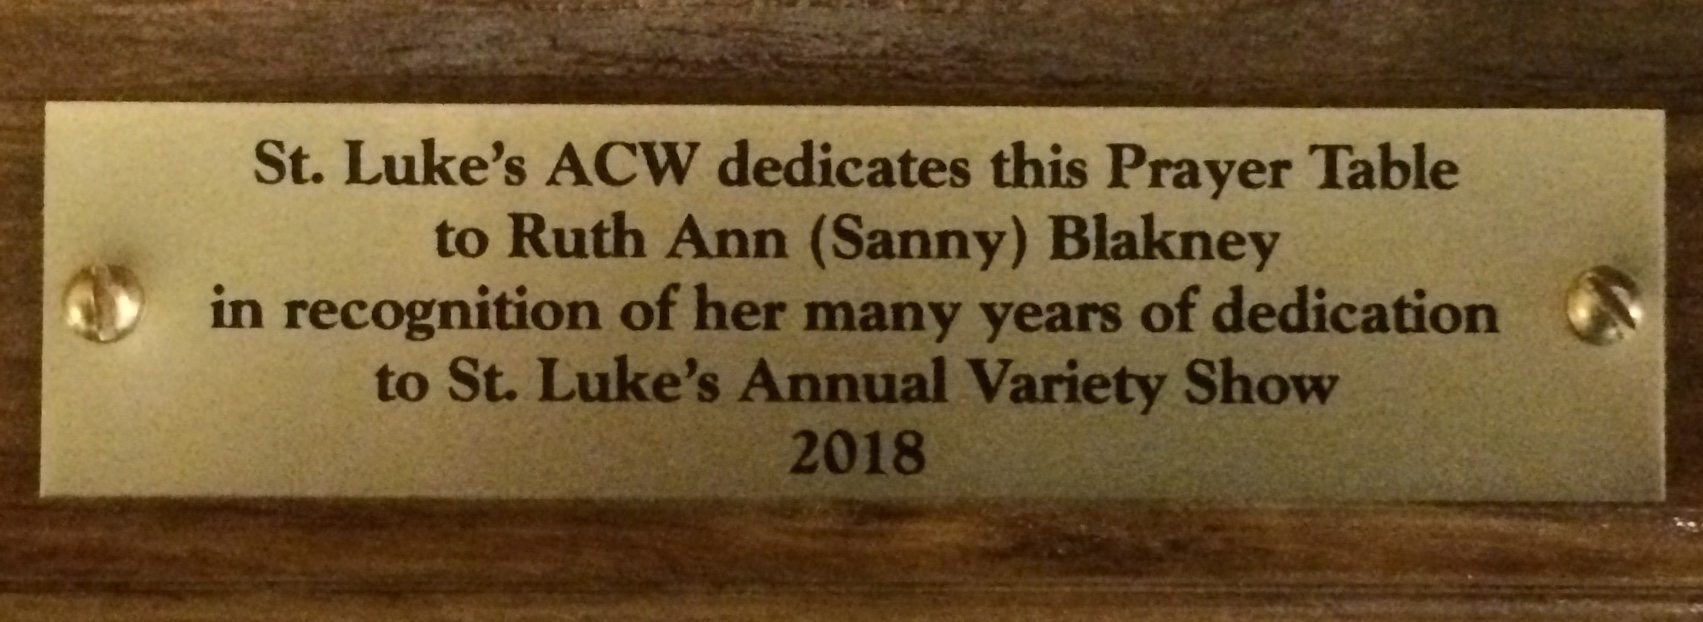 Prayer Table dedicated to Ruth Ann (Sanny) Blakney for her many years of dedication to St. Luke's Annual Variety Show, October 7, 2018.